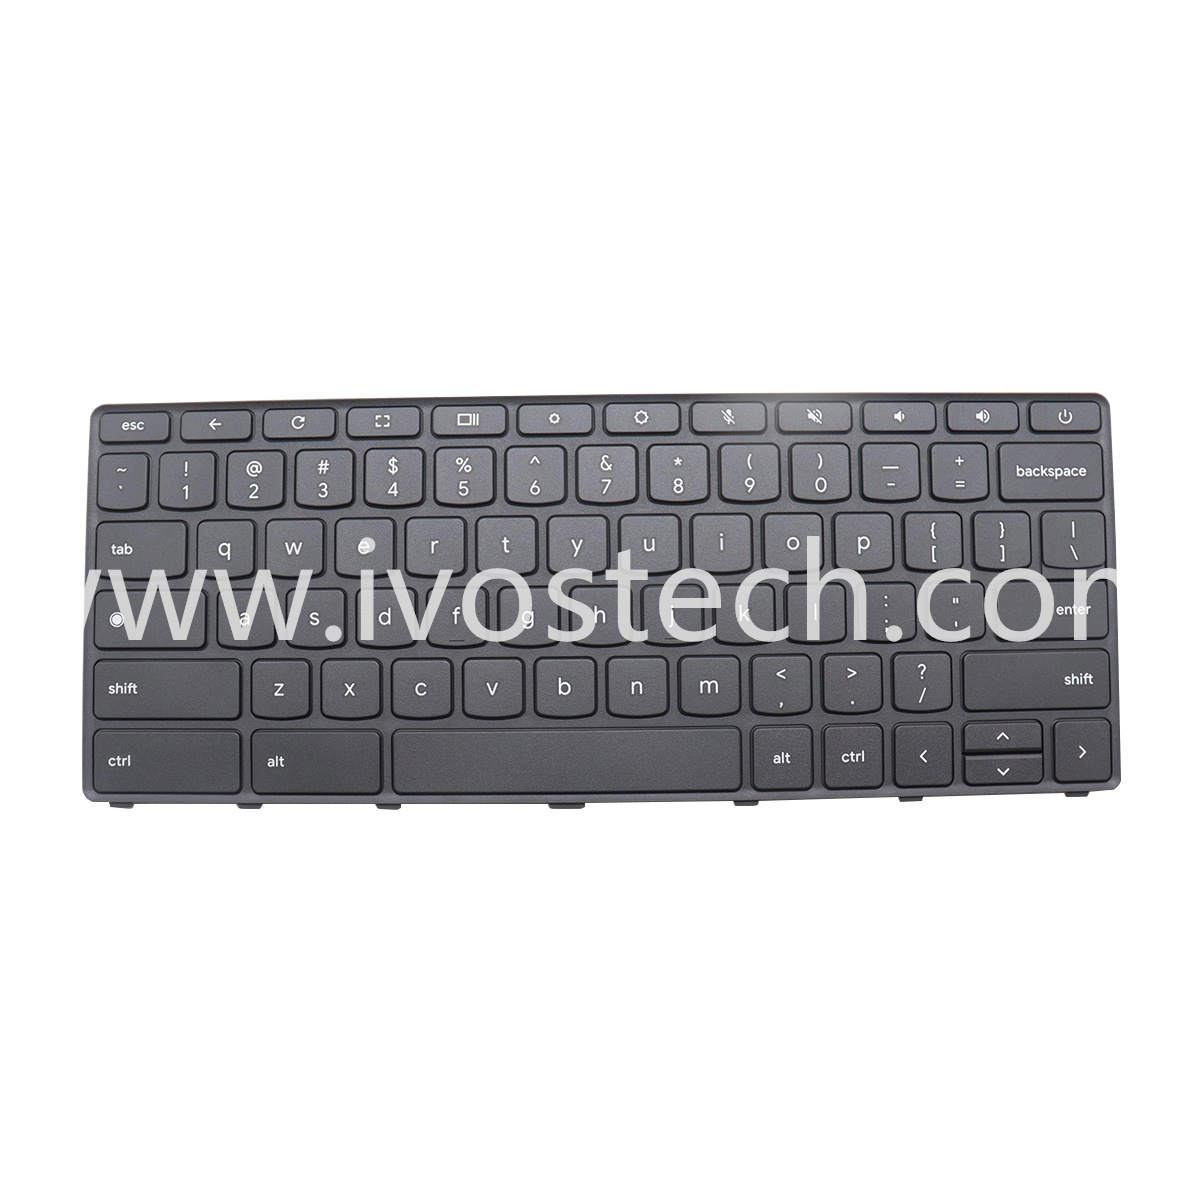 5N21L43957 Laptop Replacement Keyboard for Lenovo Chromebook 11 100e 4th Gen-US Layout English